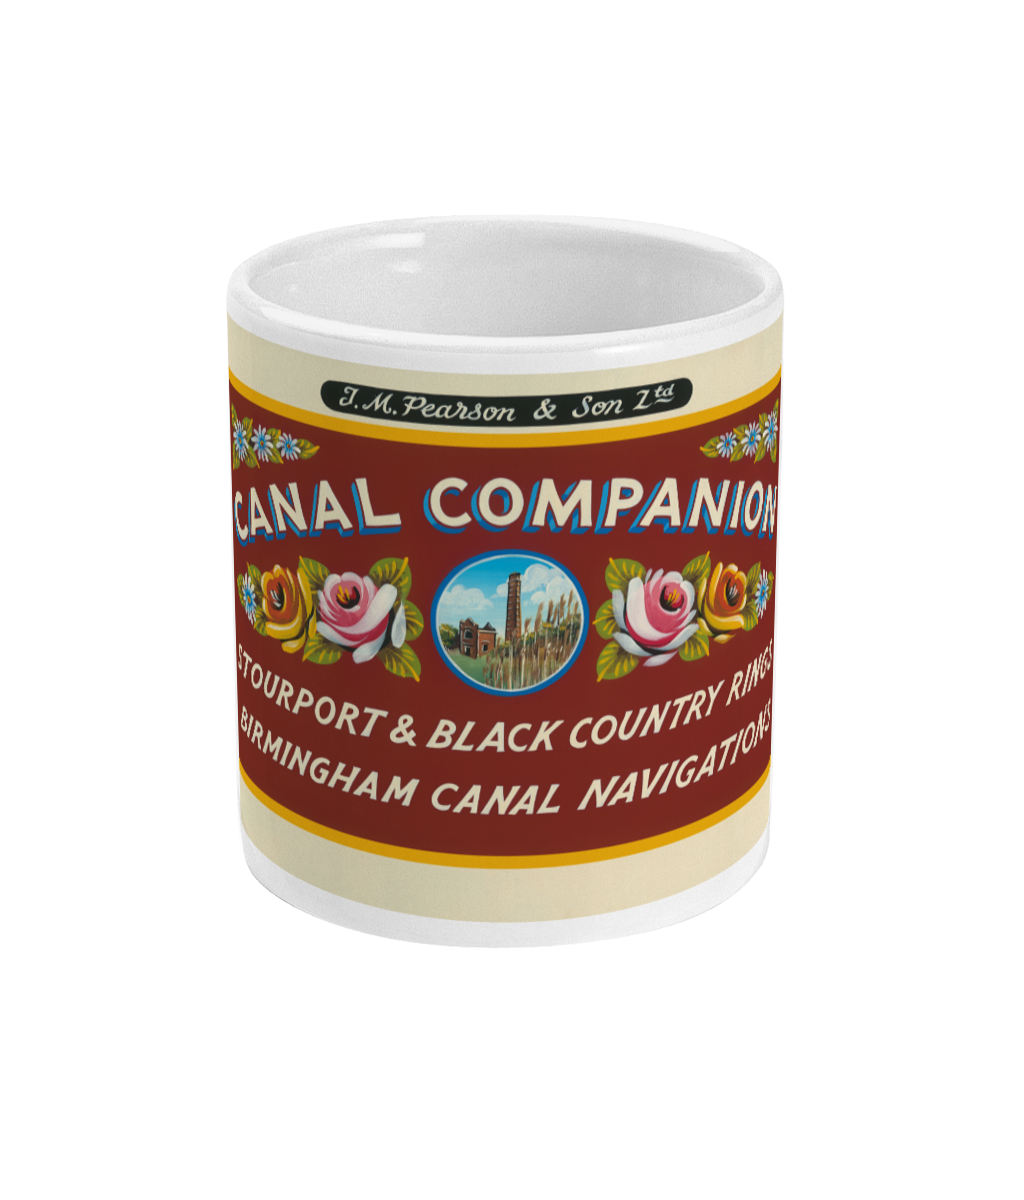 Pearson Canal Companion Ceramic Mug - Stourport And Black Country Rings